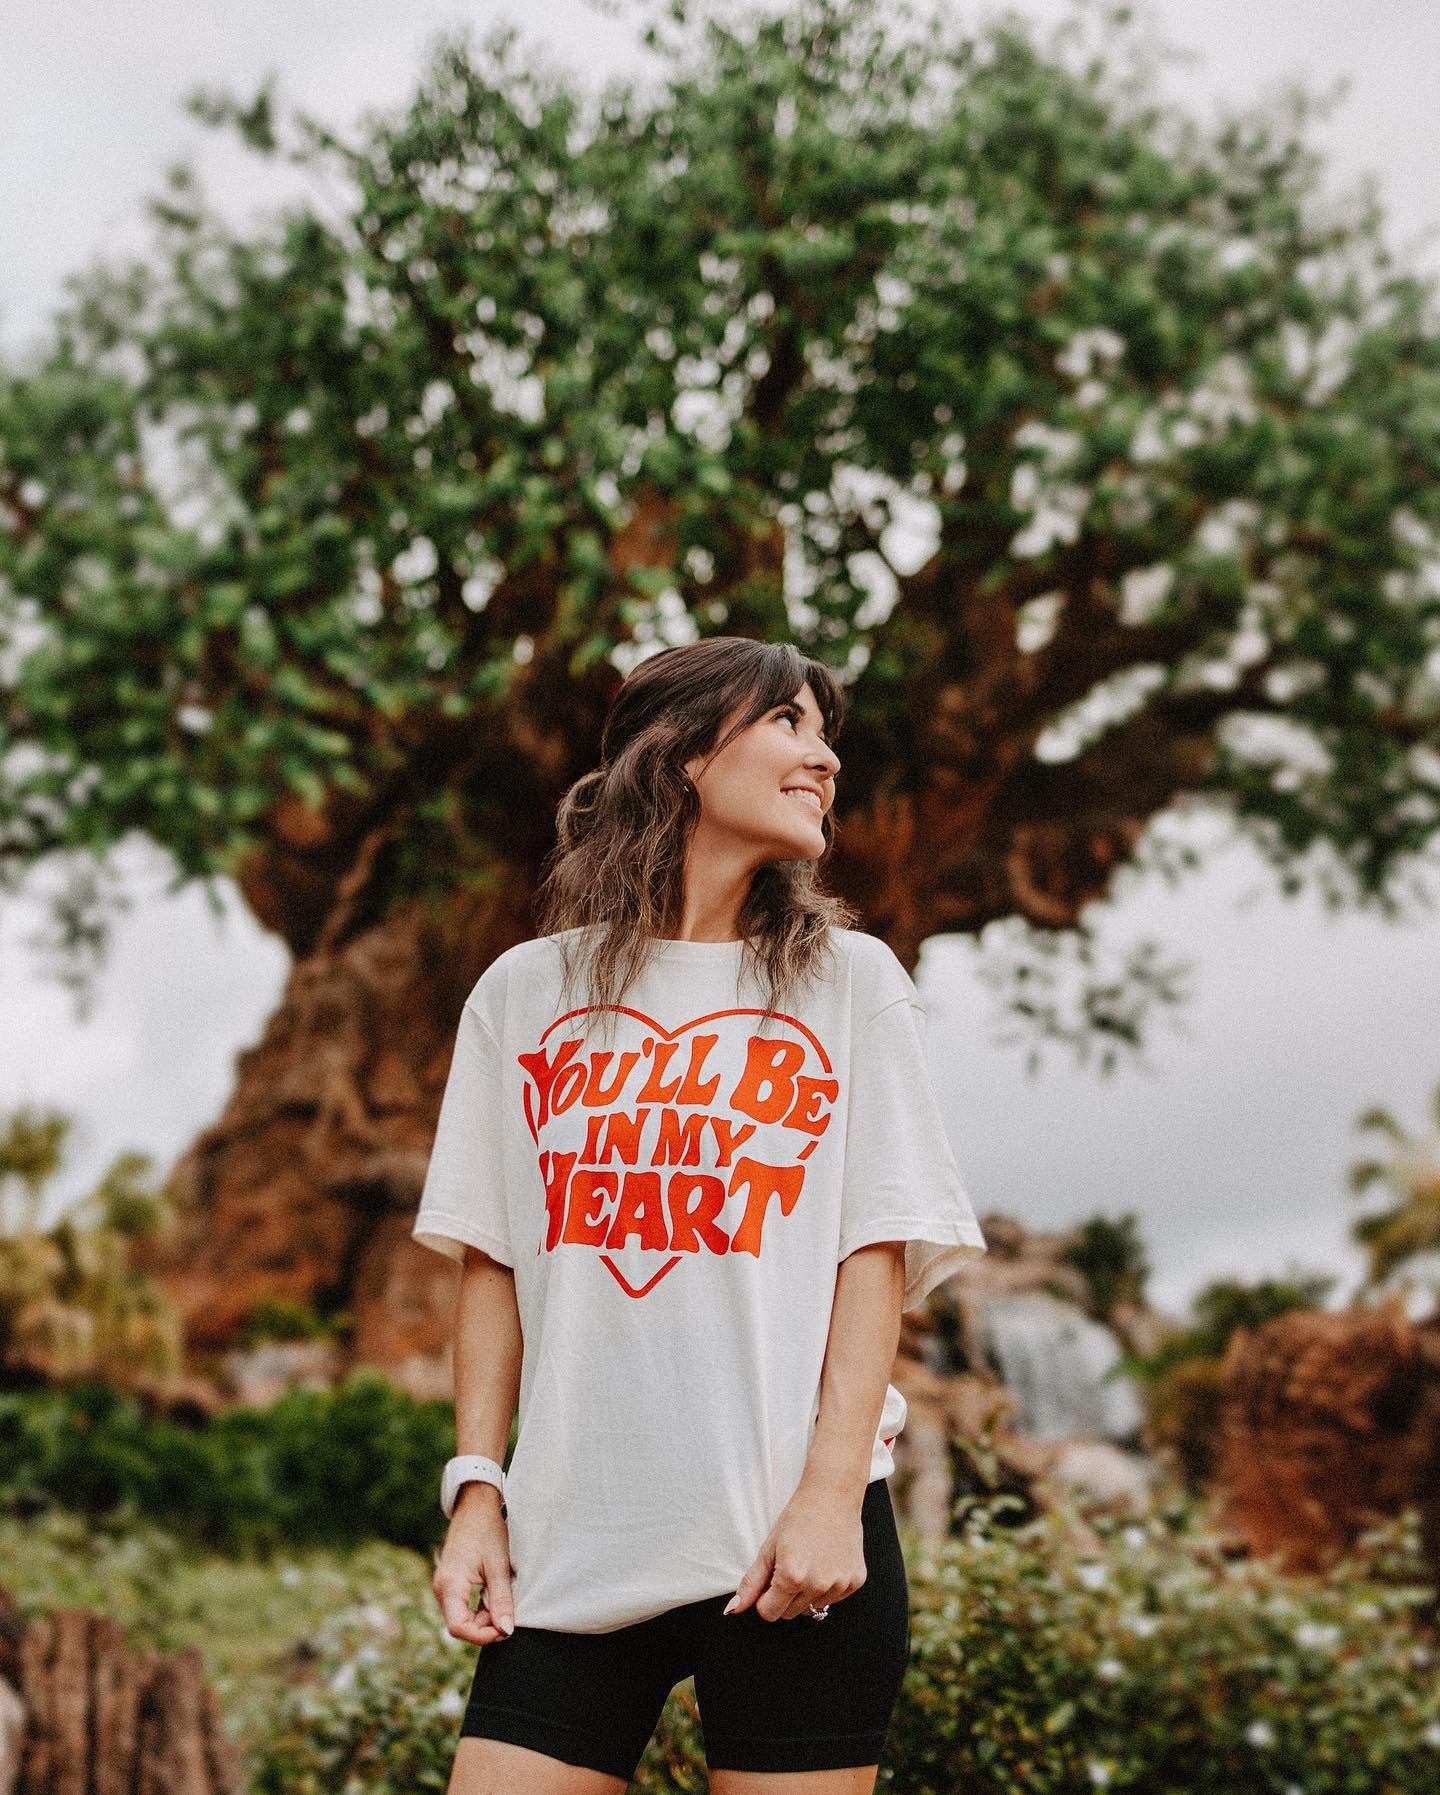 I booked an entire Disney vacation to take these photos of my Princess and it was worth every penny 😍

#disney #disneyworld #thelostbros #disneygram #disneystyle #disneyfit #animalkingdom #animalkingdomdisney #disneyvacation #disneyvacationplanner #